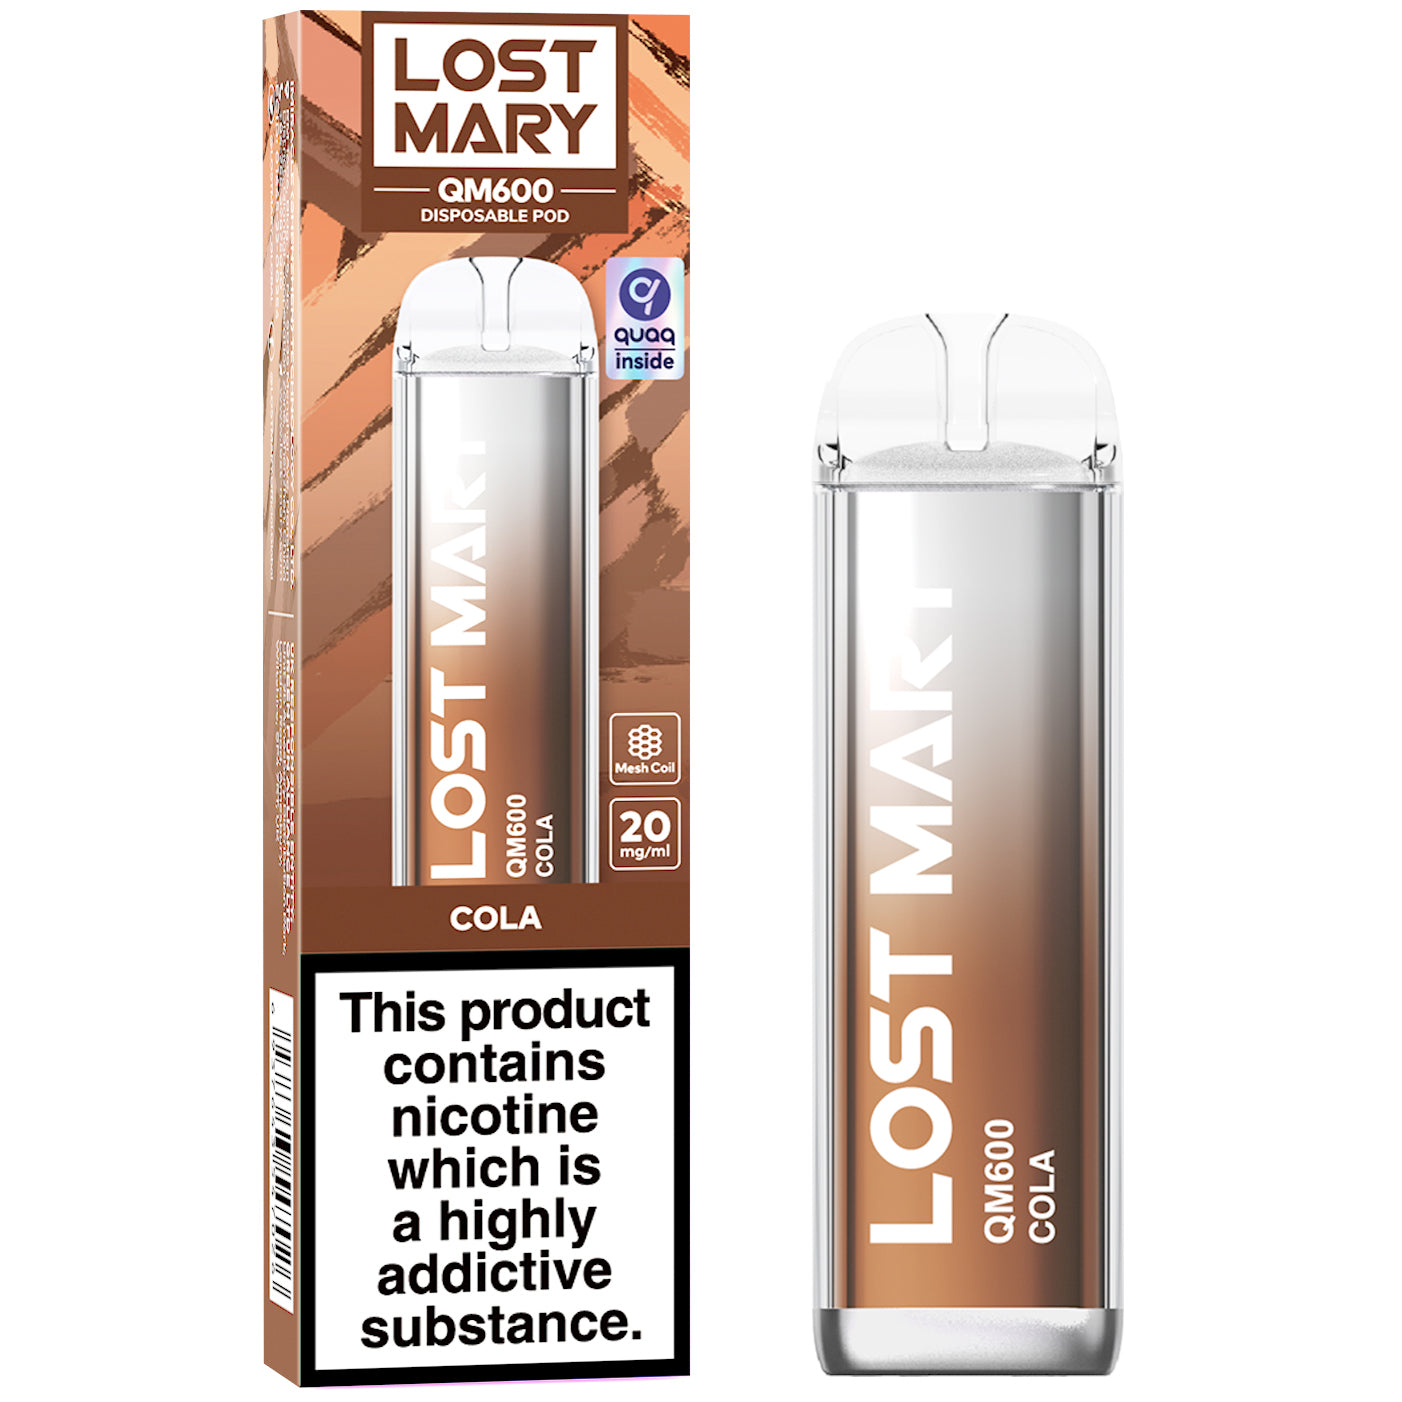 Lost Mary QM600 Cola Disposable Vape